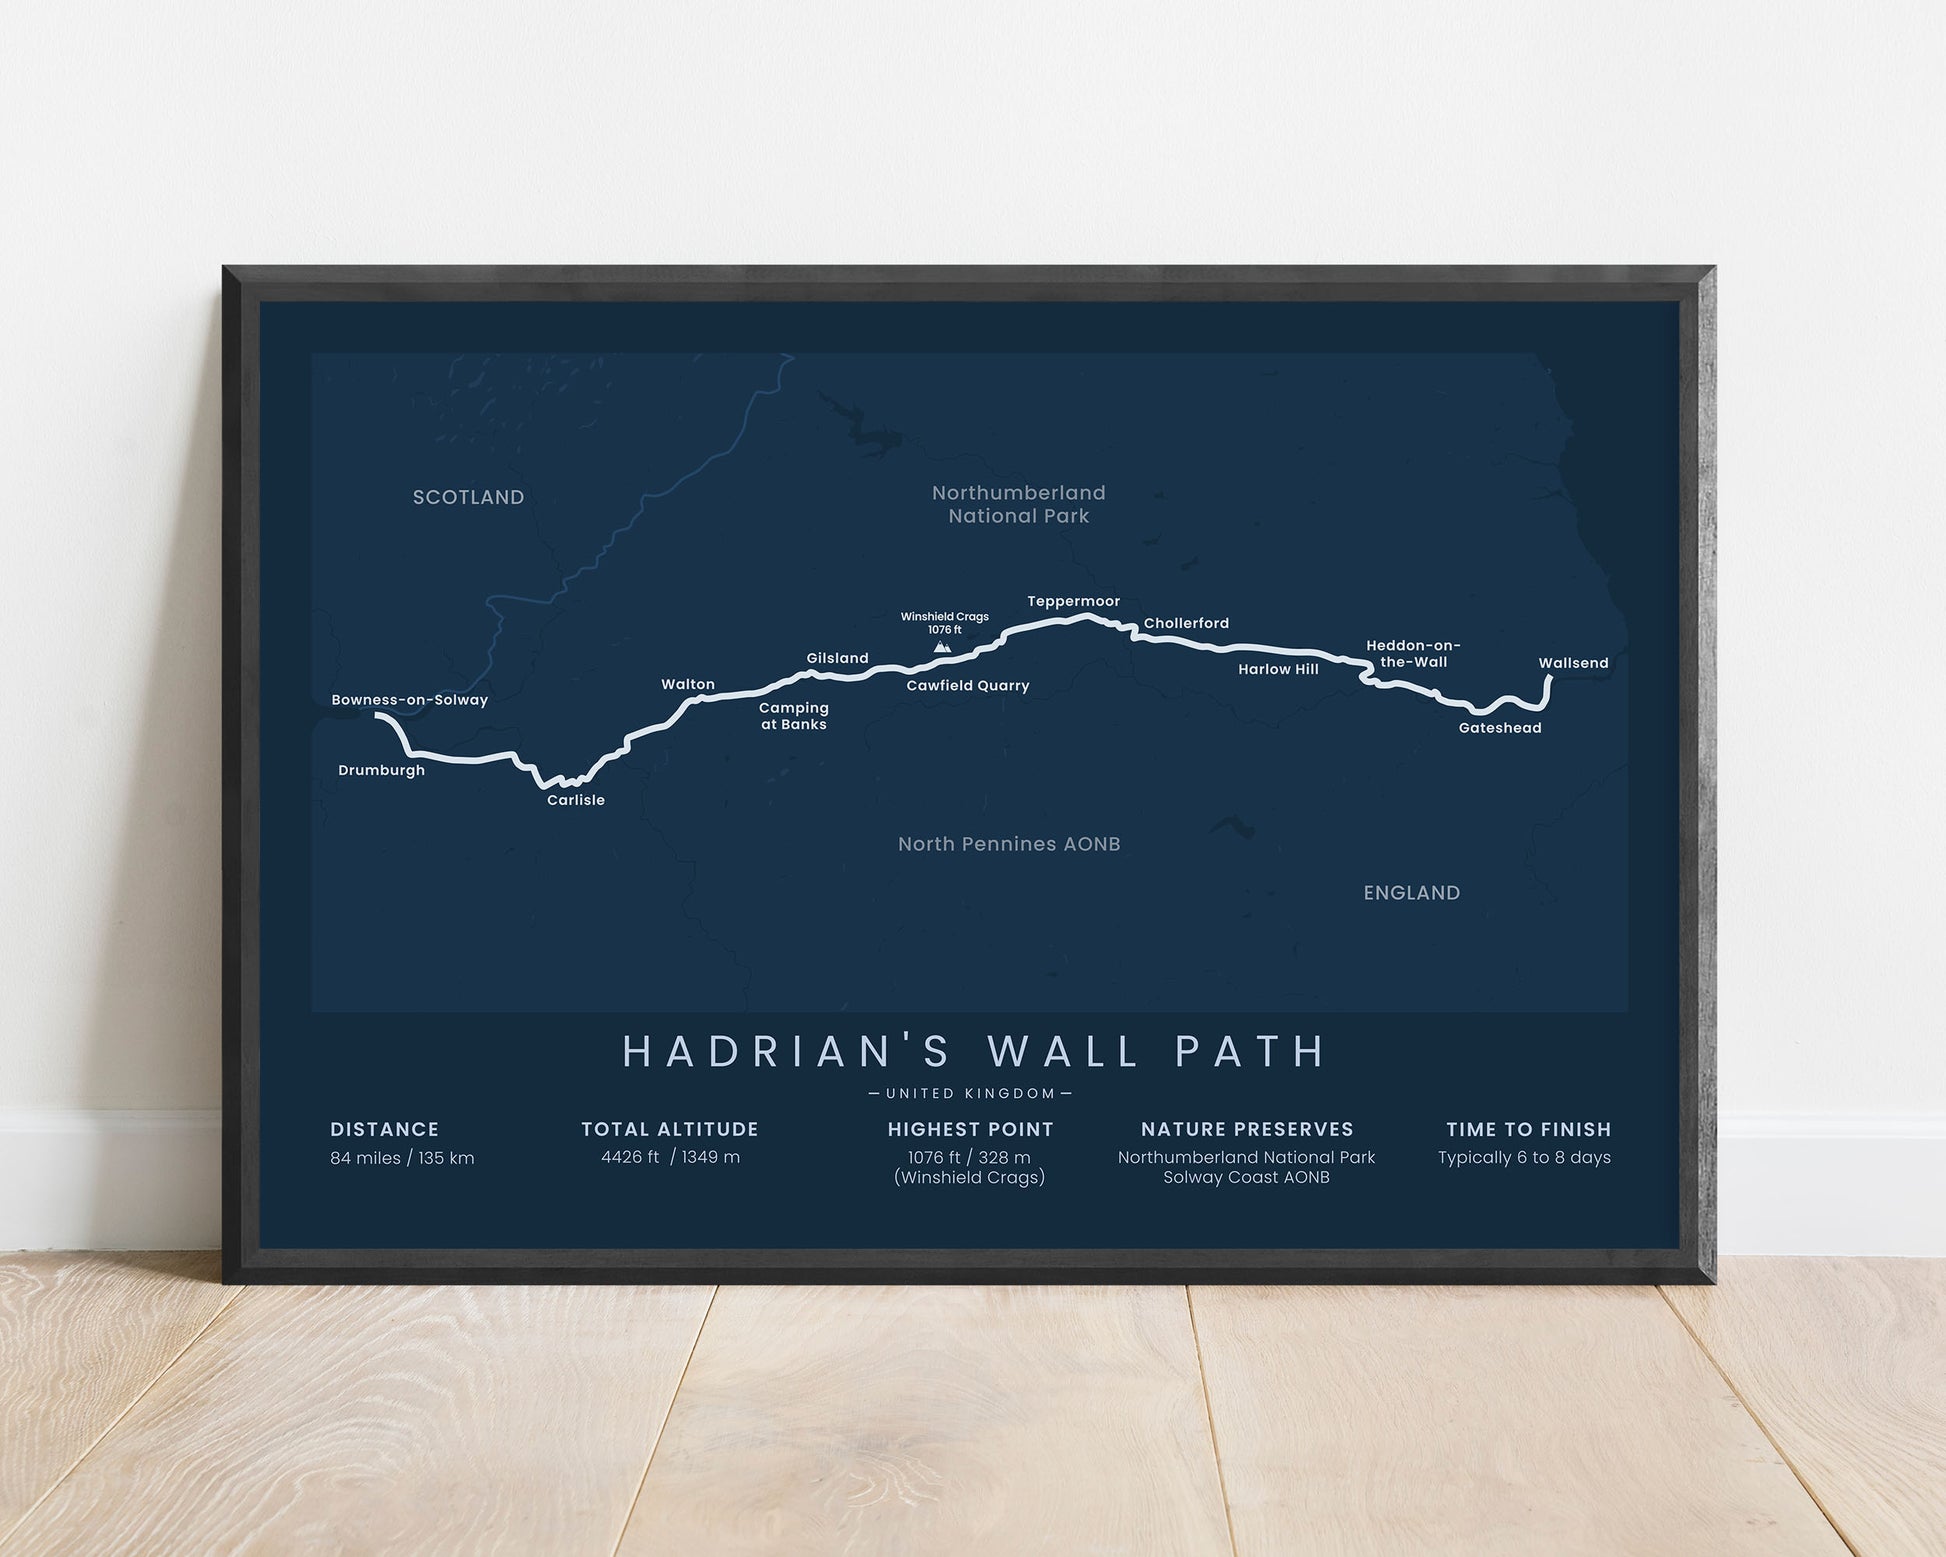 Hadrian's Wall Path (North Pennines AONB) hike print with blue background